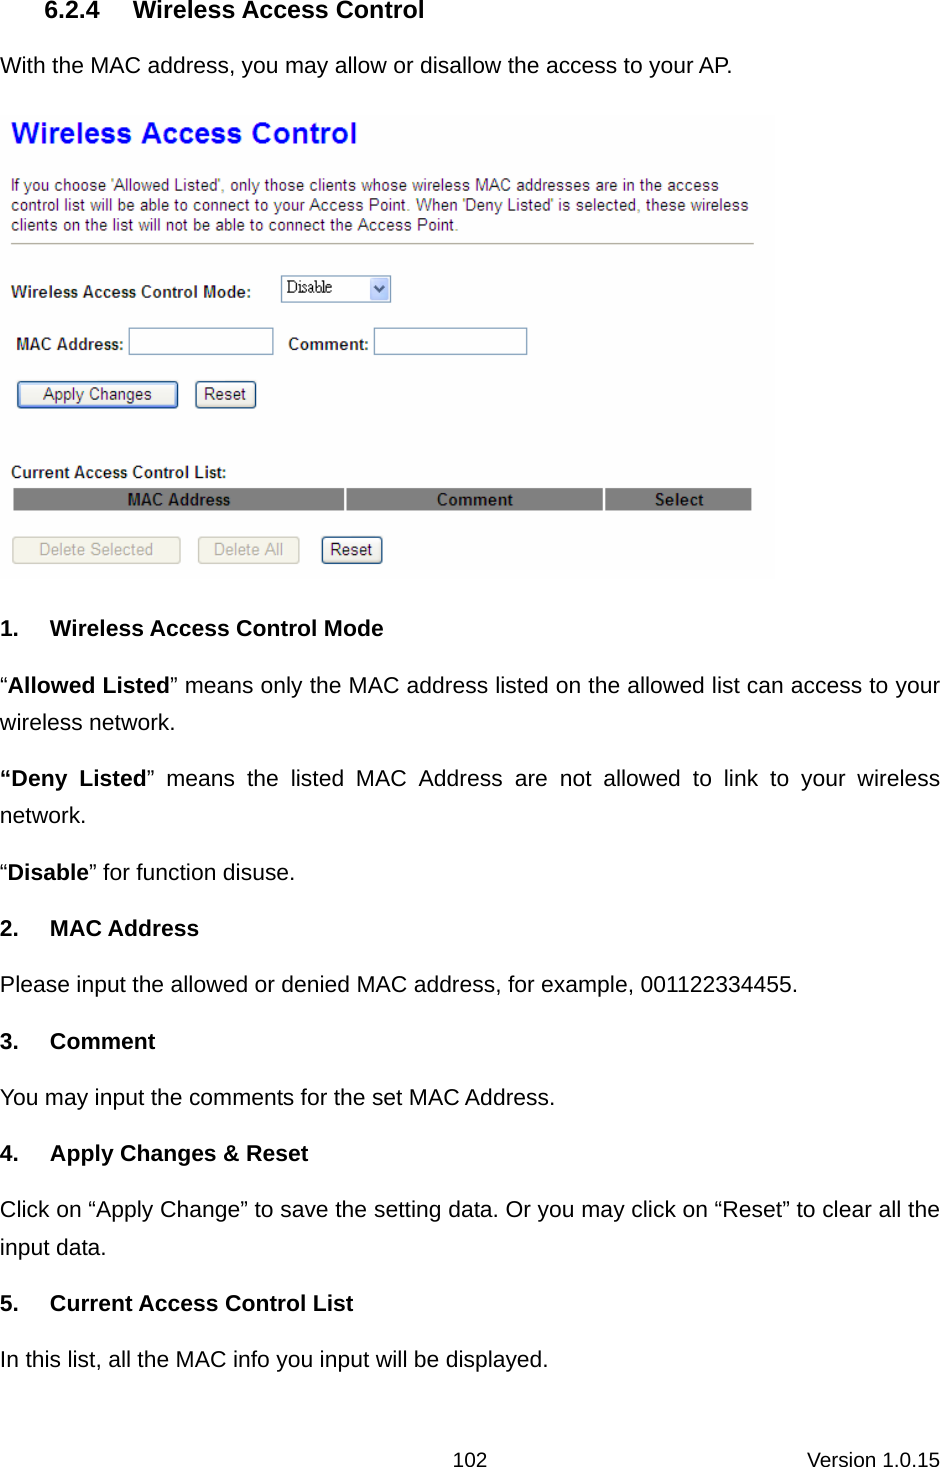 Version 1.0.15 1026.2.4 Wireless Access Control With the MAC address, you may allow or disallow the access to your AP.    1.  Wireless Access Control Mode “Allowed Listed” means only the MAC address listed on the allowed list can access to your wireless network.   “Deny Listed” means the listed MAC Address are not allowed to link to your wireless network.  “Disable” for function disuse.   2. MAC Address Please input the allowed or denied MAC address, for example, 001122334455. 3. Comment You may input the comments for the set MAC Address.   4.  Apply Changes &amp; Reset Click on “Apply Change” to save the setting data. Or you may click on “Reset” to clear all the input data. 5.  Current Access Control List In this list, all the MAC info you input will be displayed.   